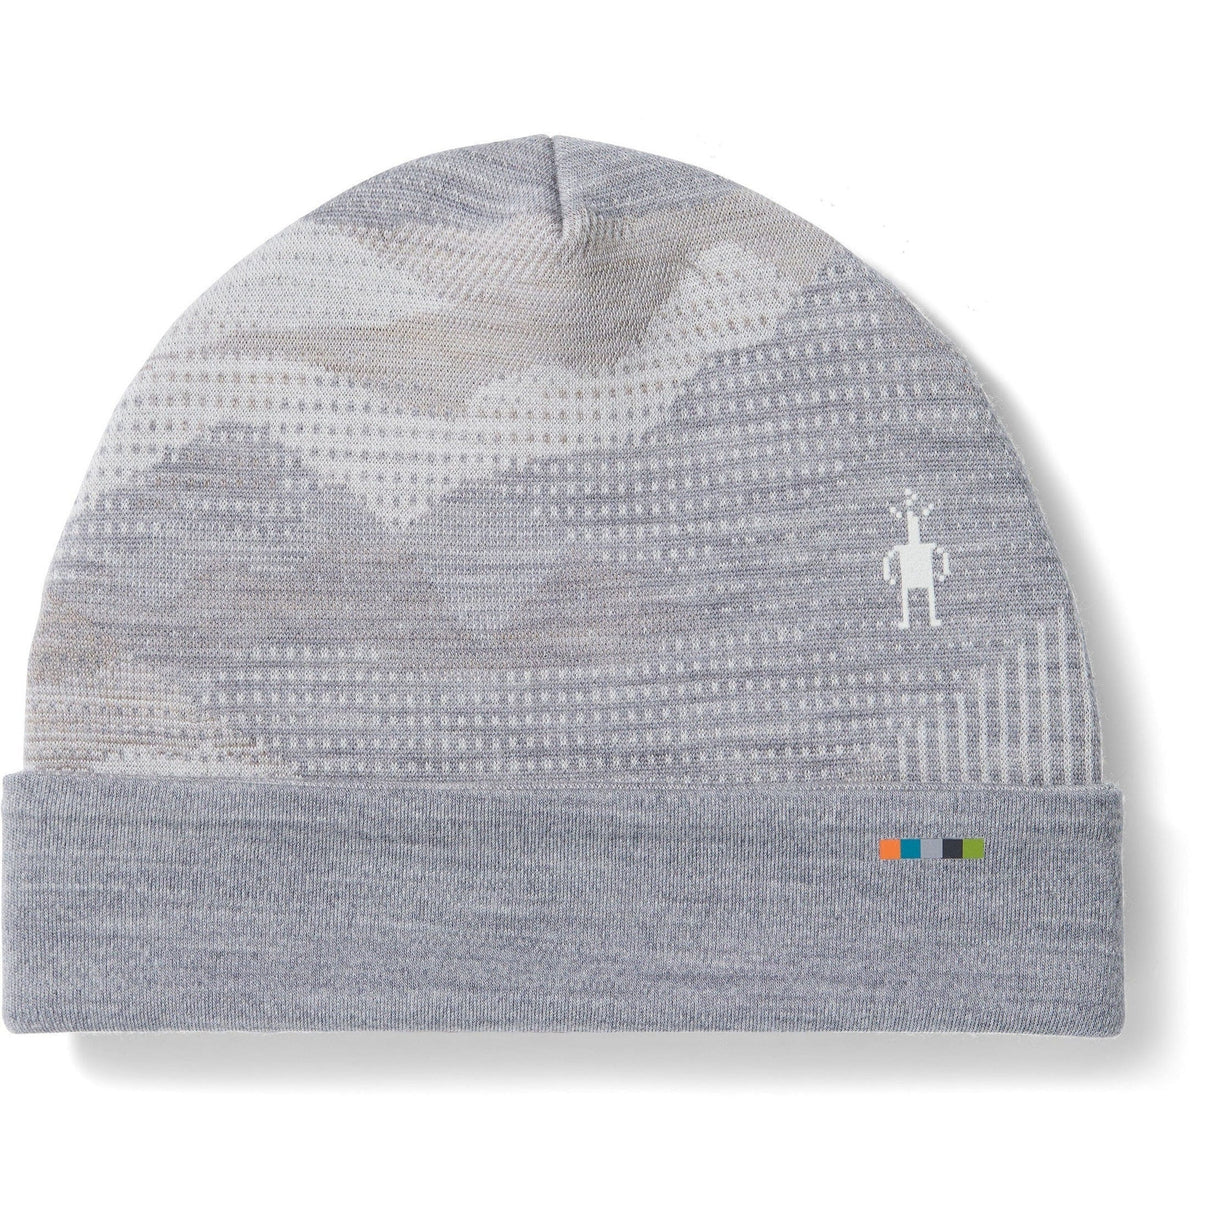 Smartwool Thermal Merino Reversible Cuffed Beanie  -  One Size Fits Most / Light Gray Mountain Scape